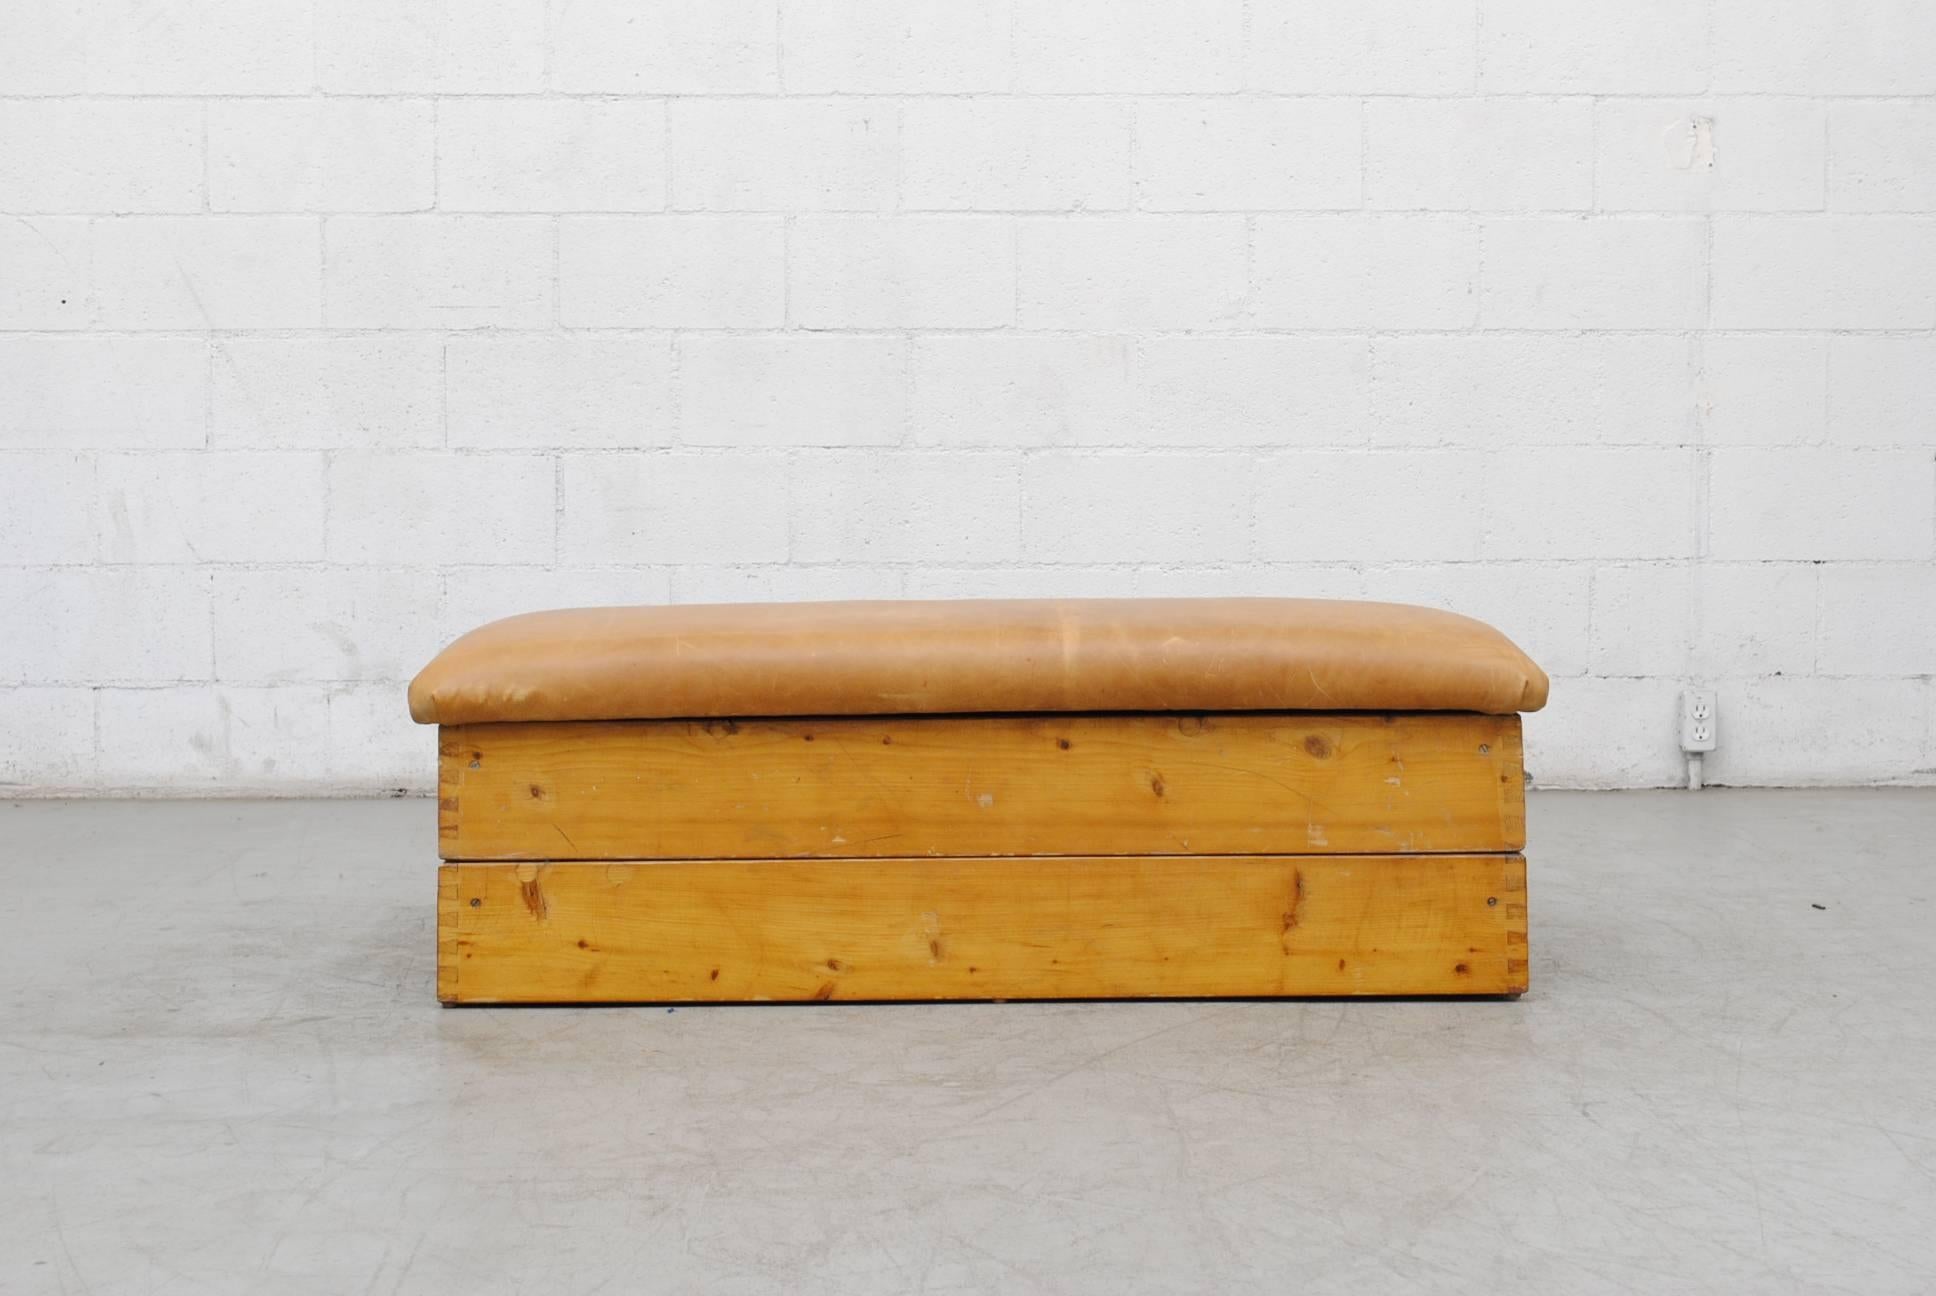 Original Dutch gymnastics vault transformed into a low multipurpose ottoman-bench-coffee table in teak and oak with leather top. Two-tiered stack-able.